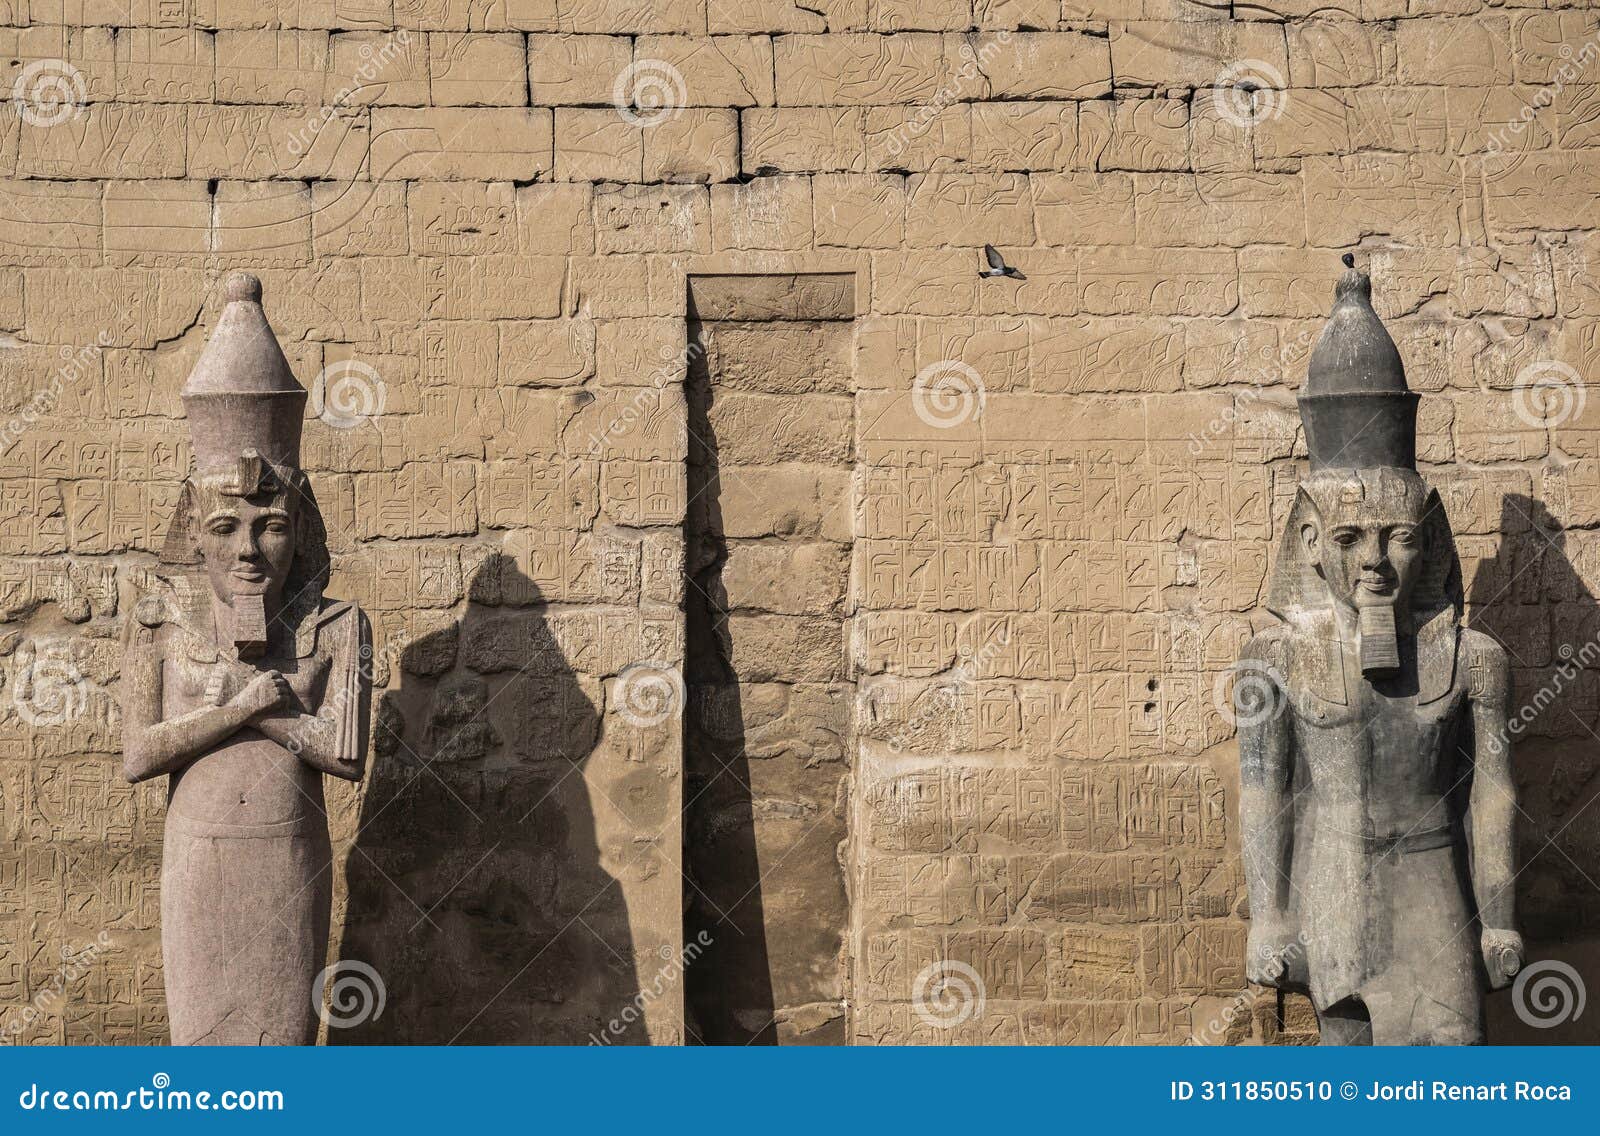 luxor temple in egypt